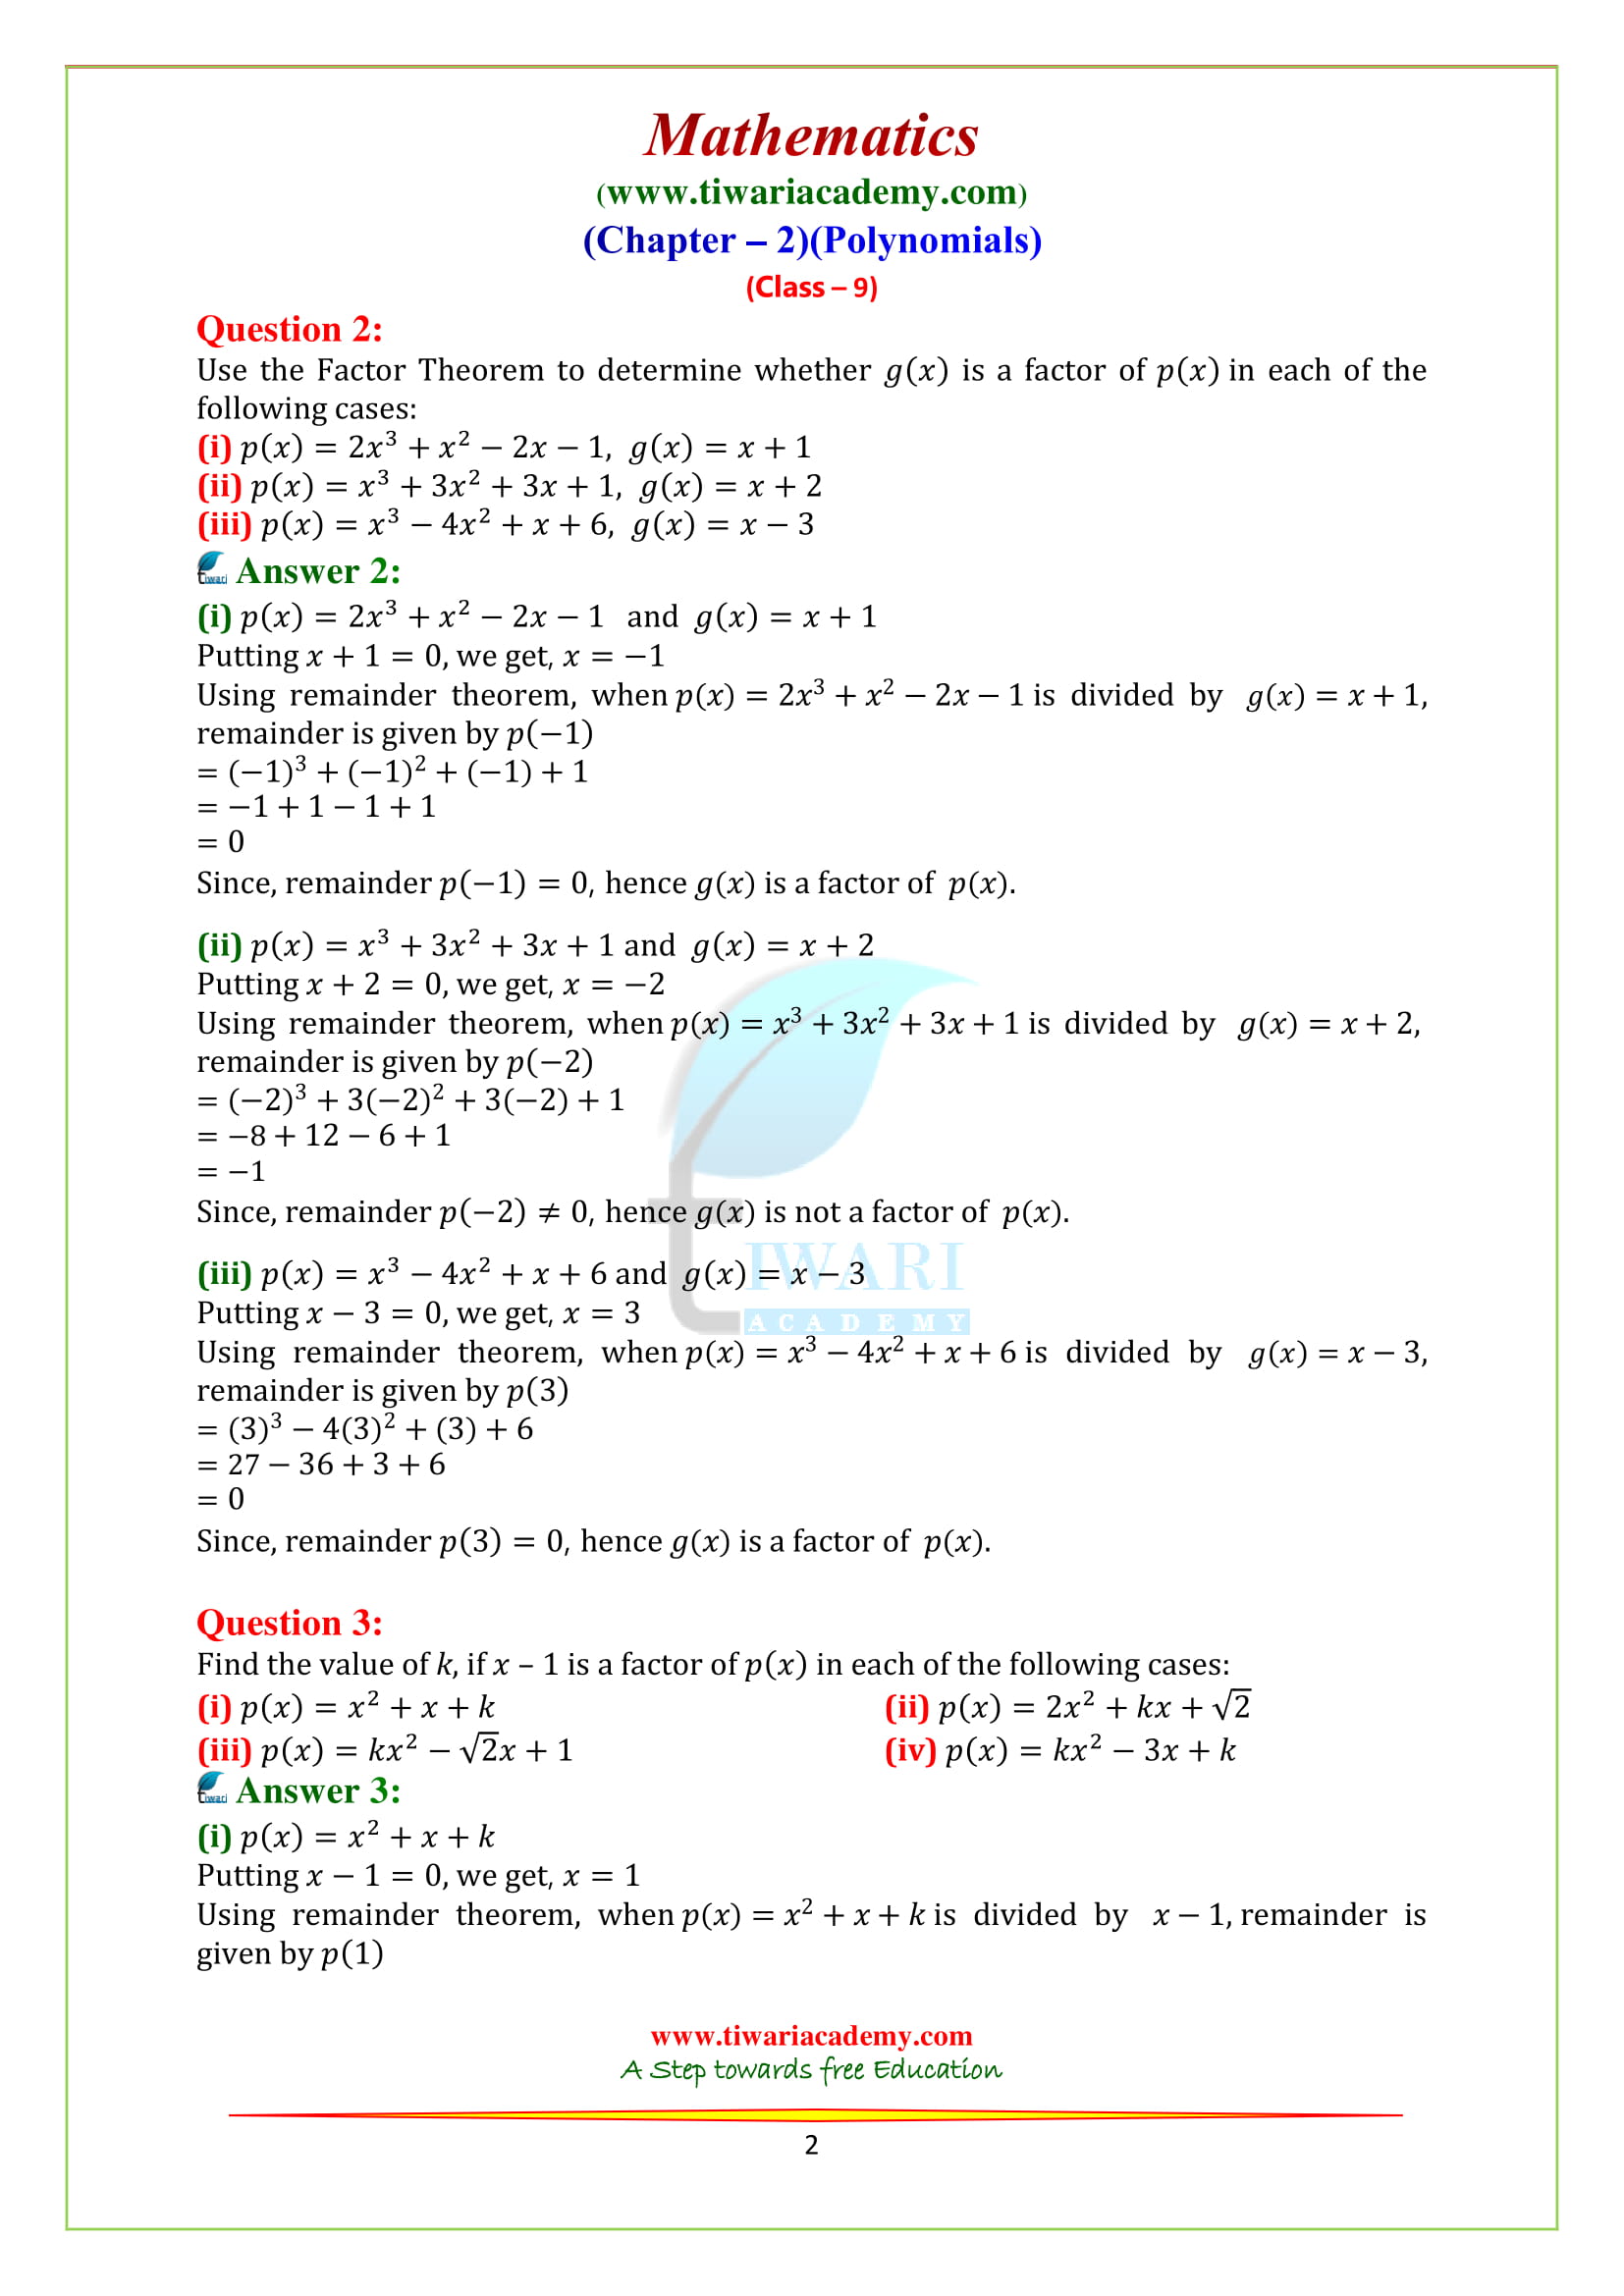 NCERT Solutions for class 9 Maths chapter 2 exercise 2.4 Polynomials English medium